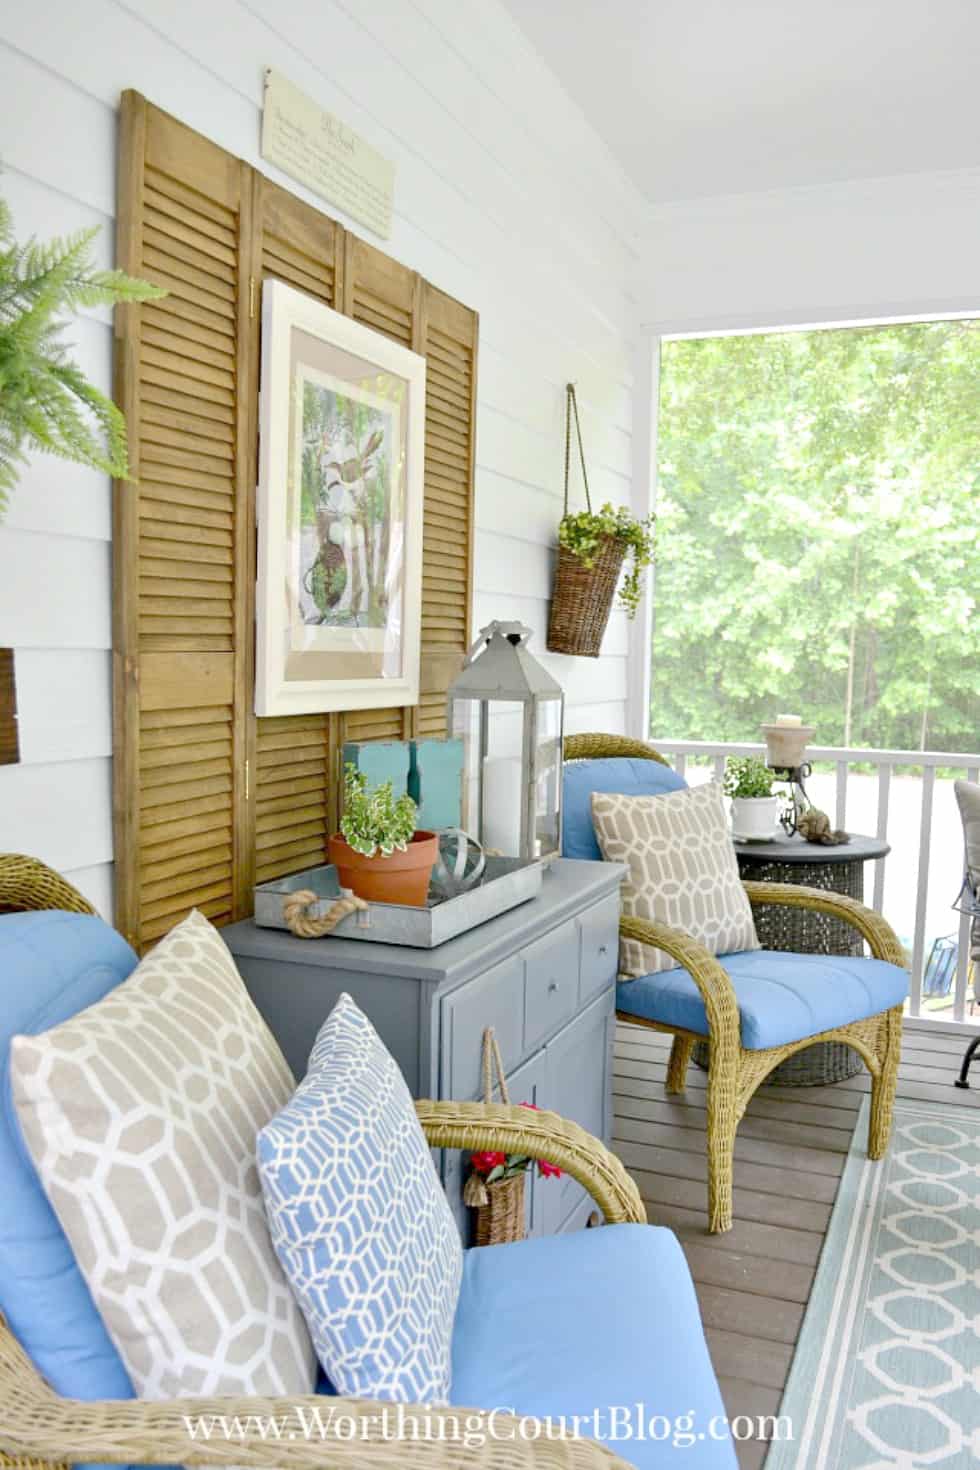 Southern Screen Porch Reveal - Before and After